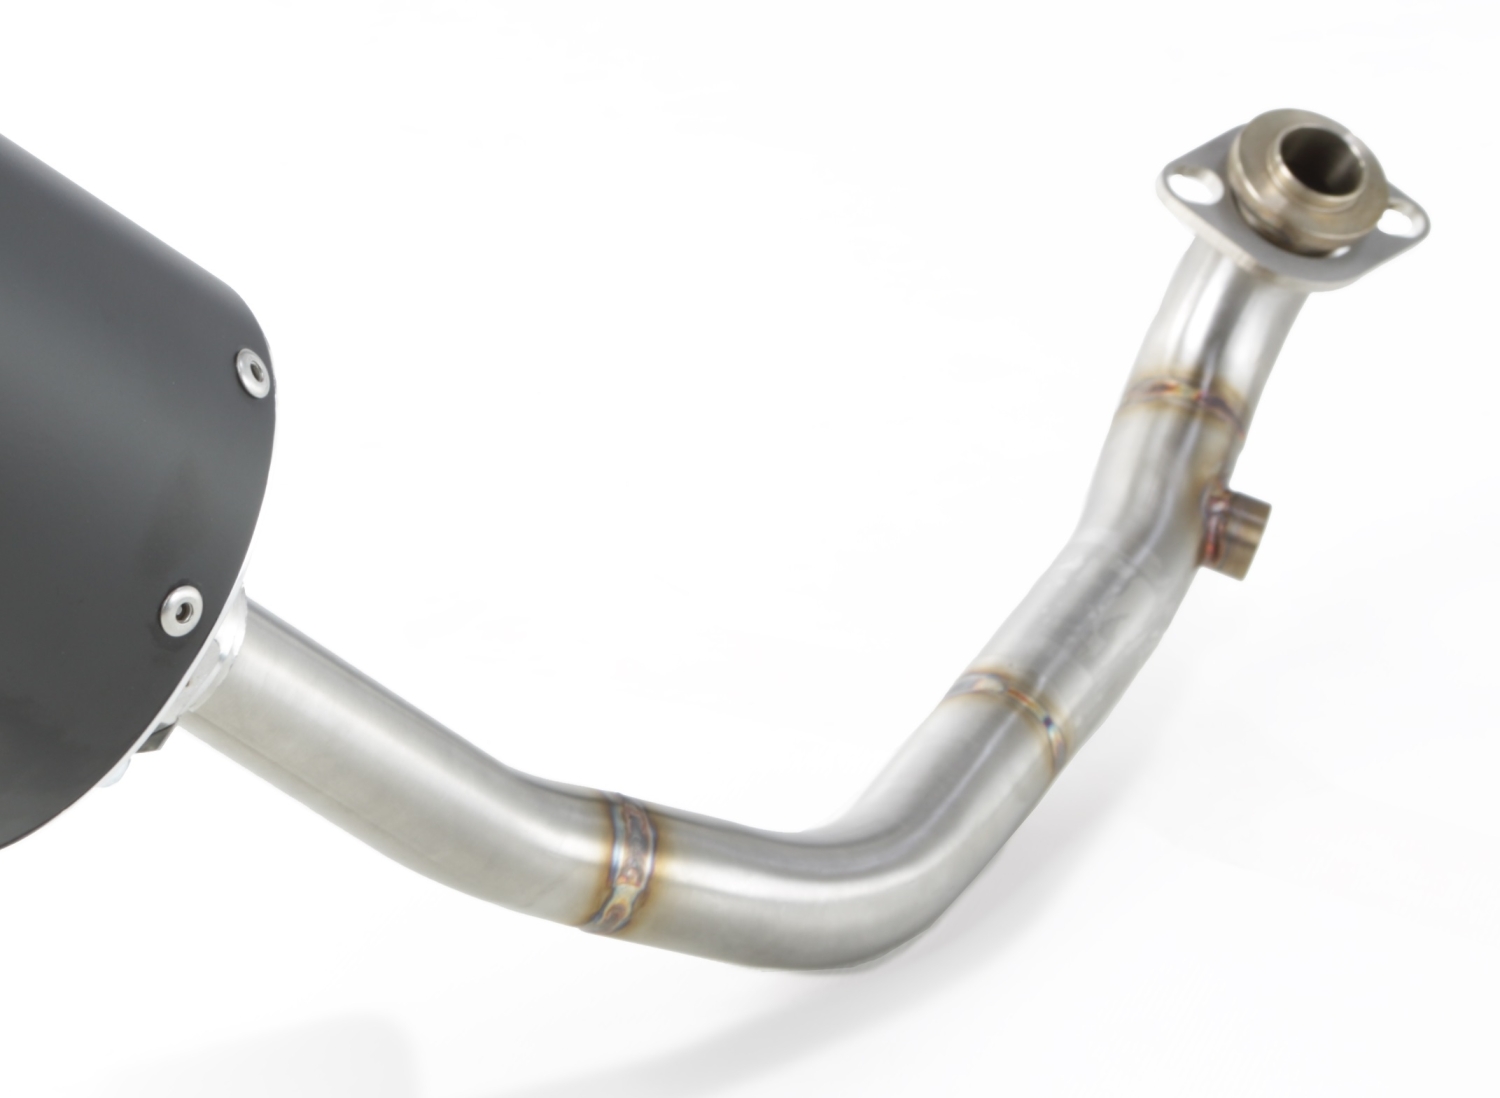 GPR exhaust compatible with  Gilera Nexus 500 2003-2012, Evo4 Road, Full system exhaust, including removable db killer  